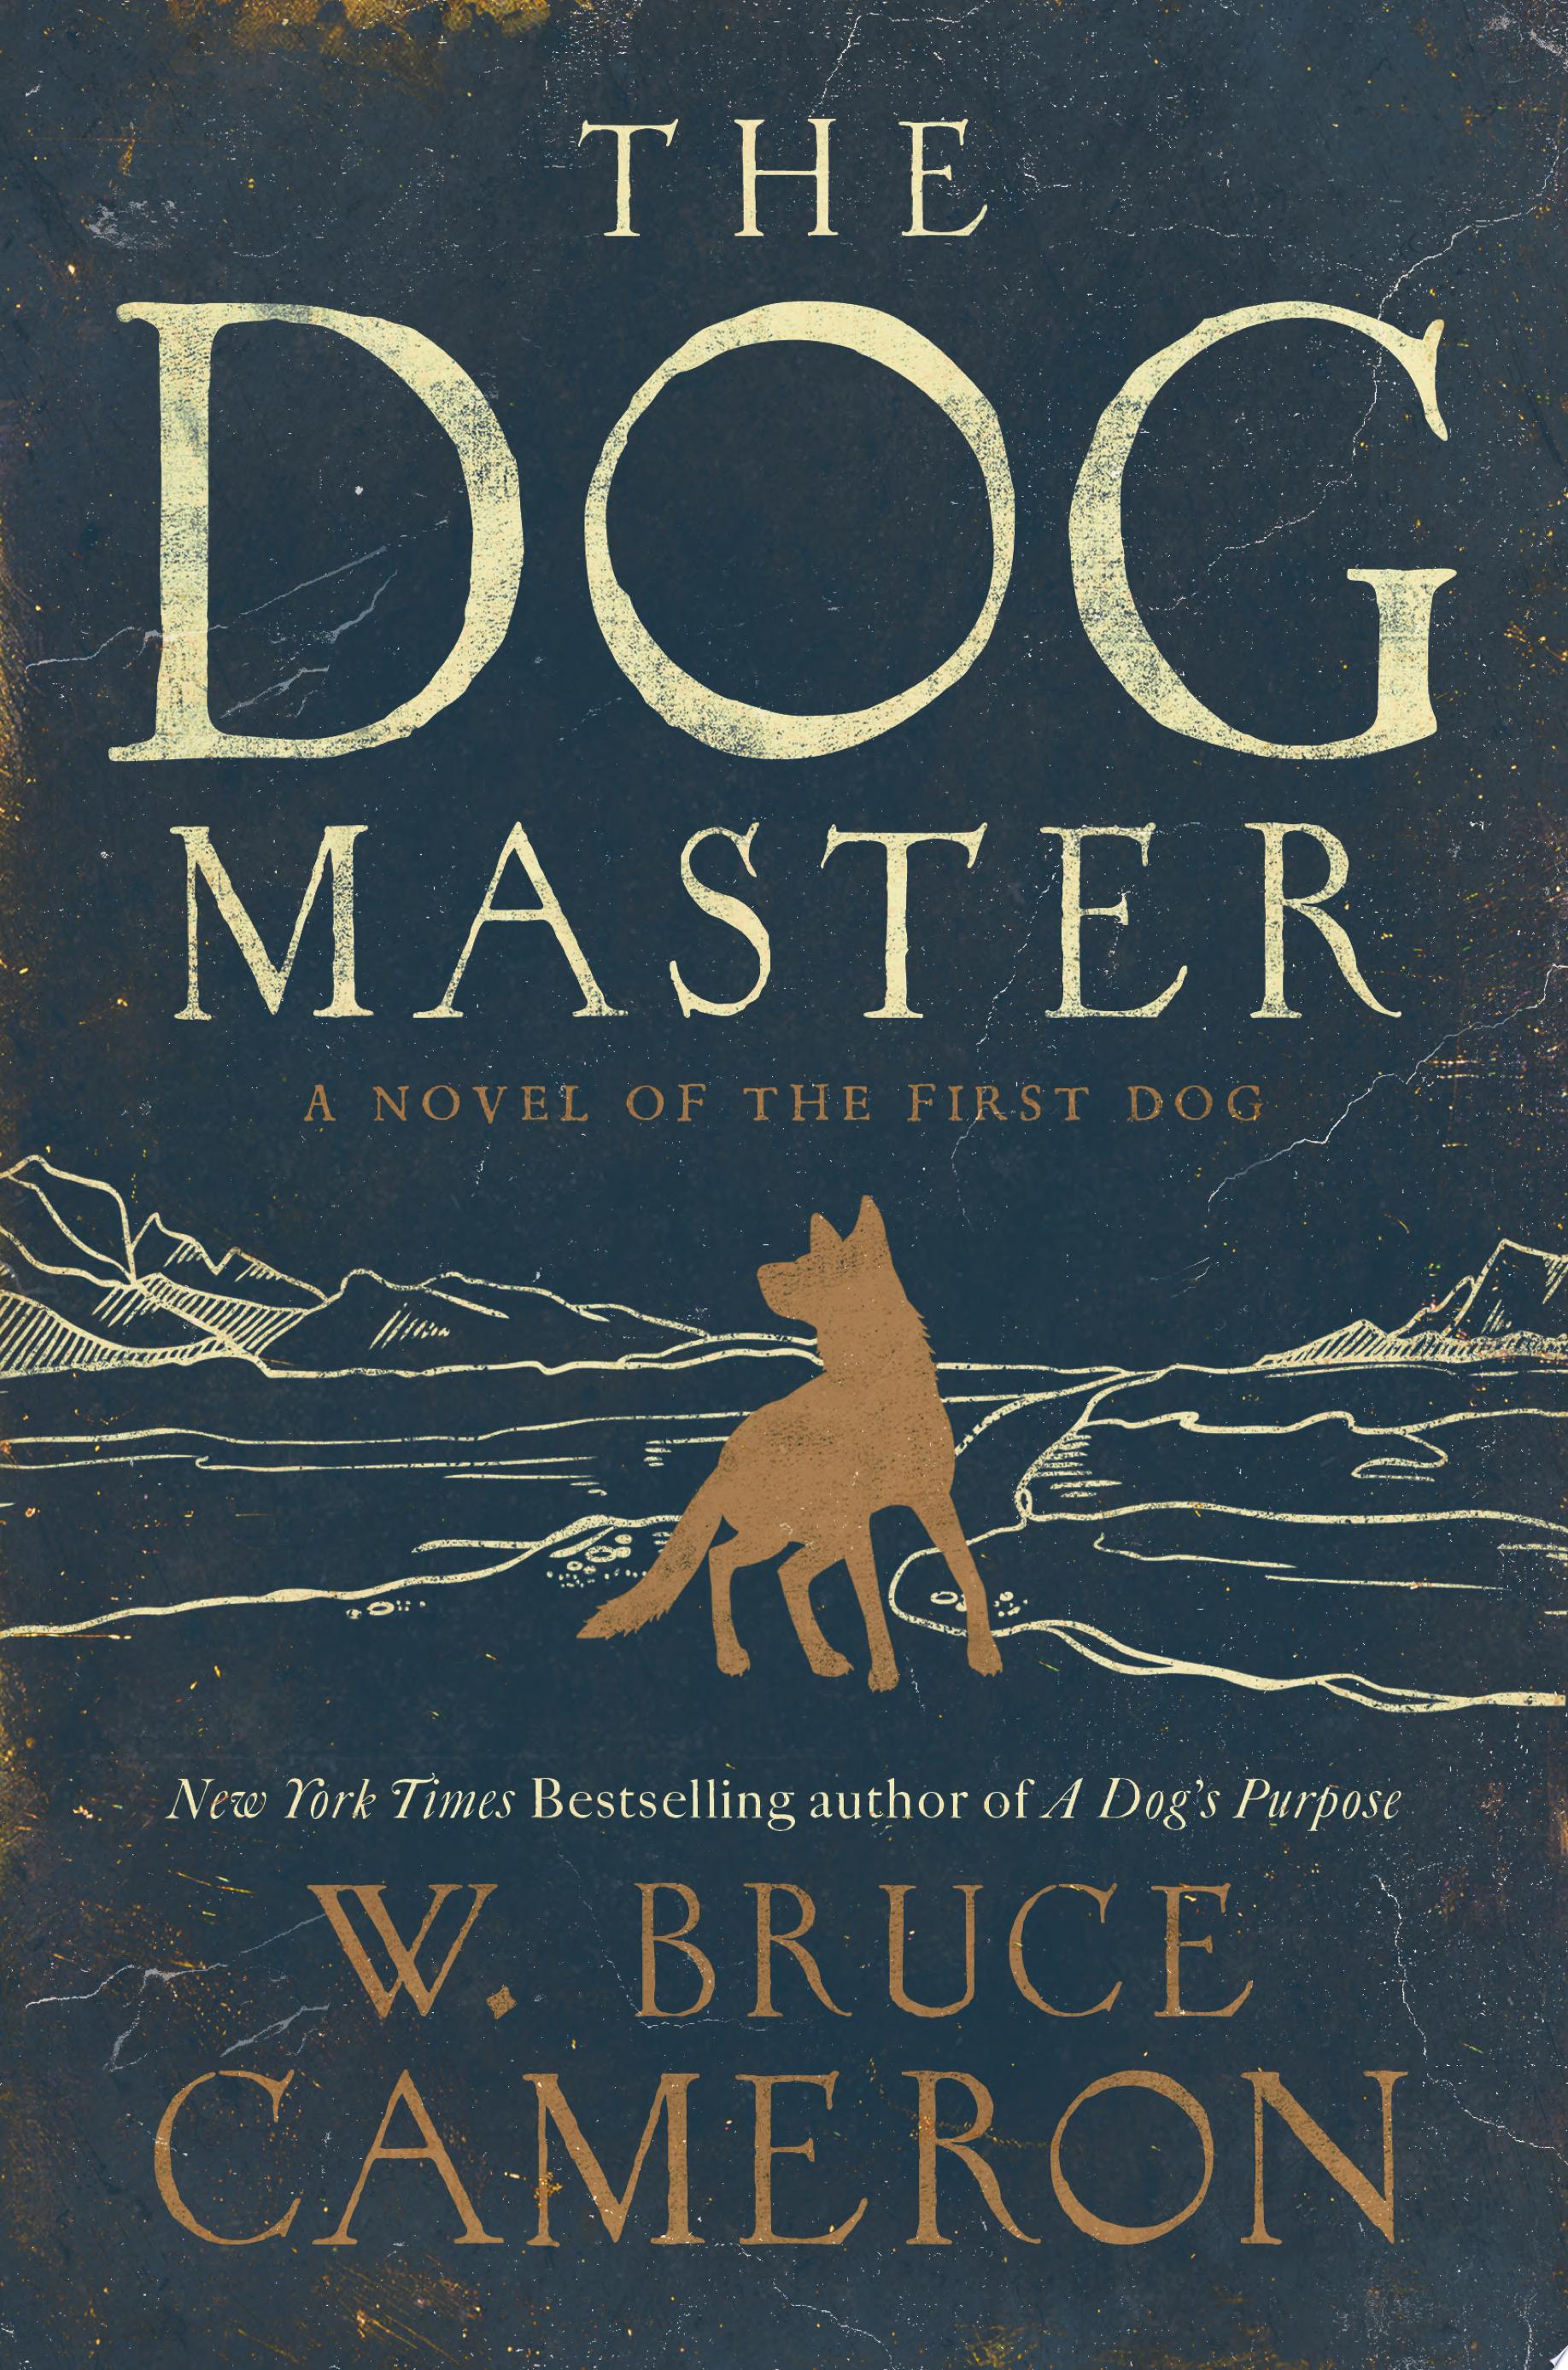 Image for "The Dog Master"